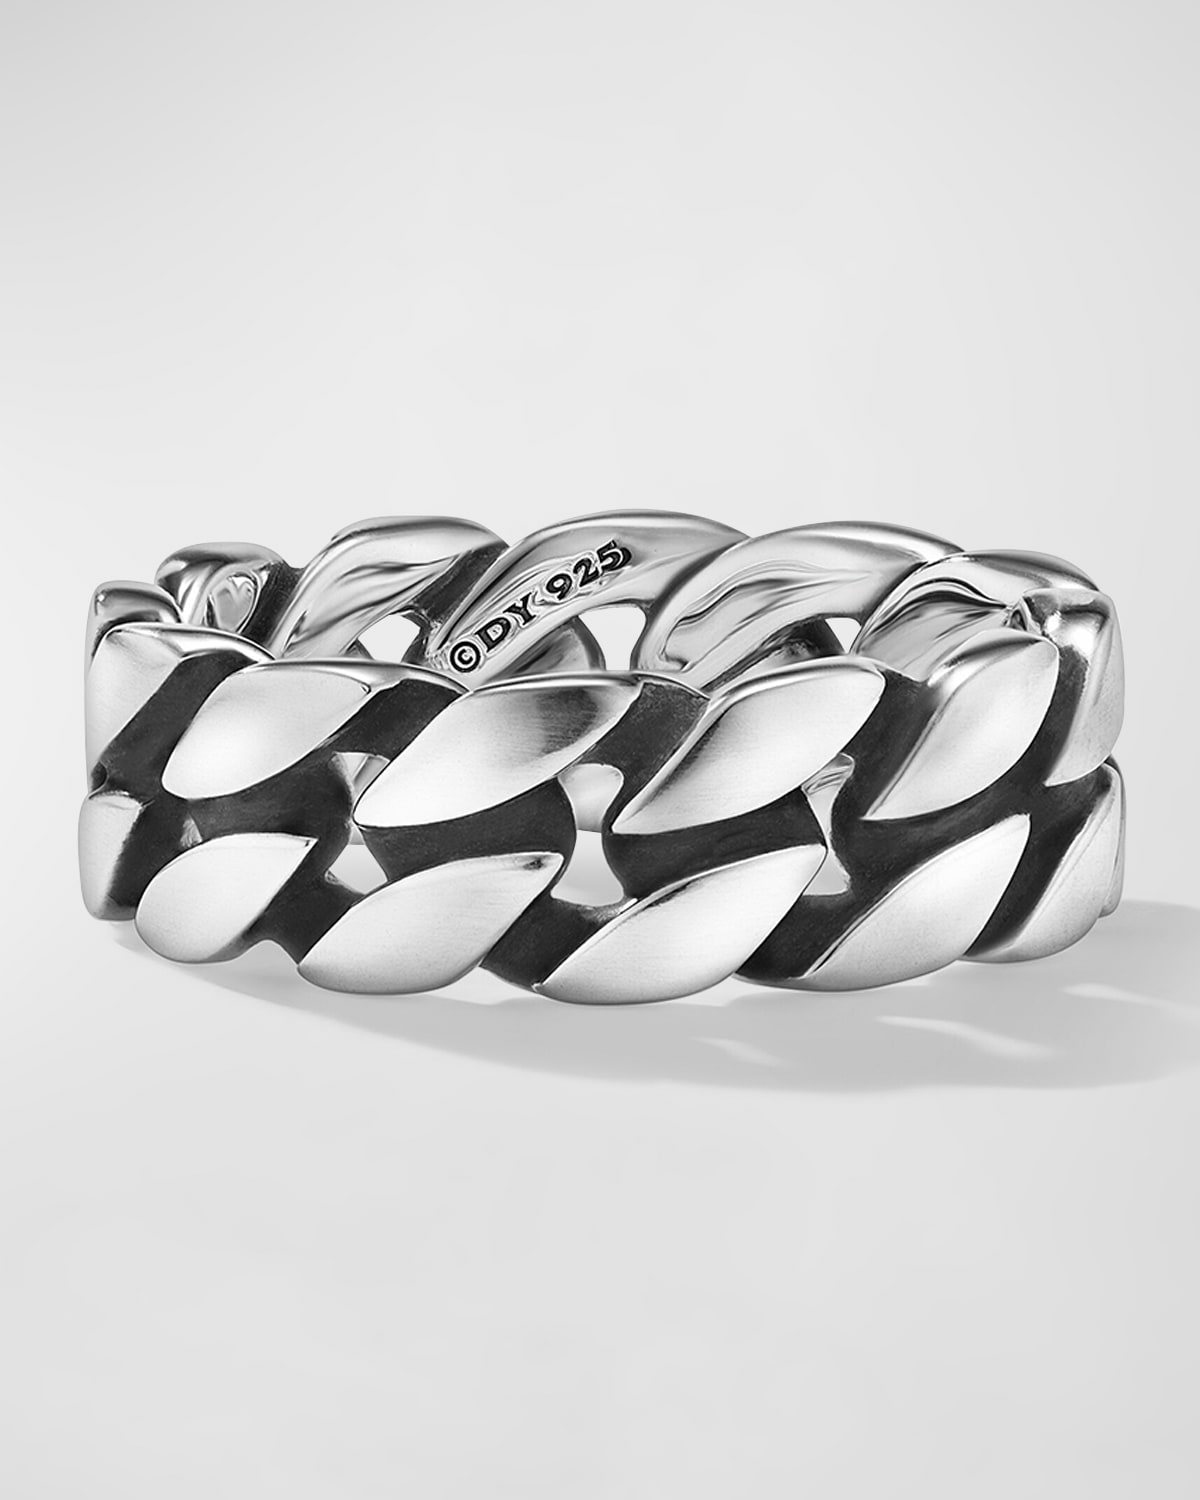 Men's Curb Chain Ring in Silver, 8mm